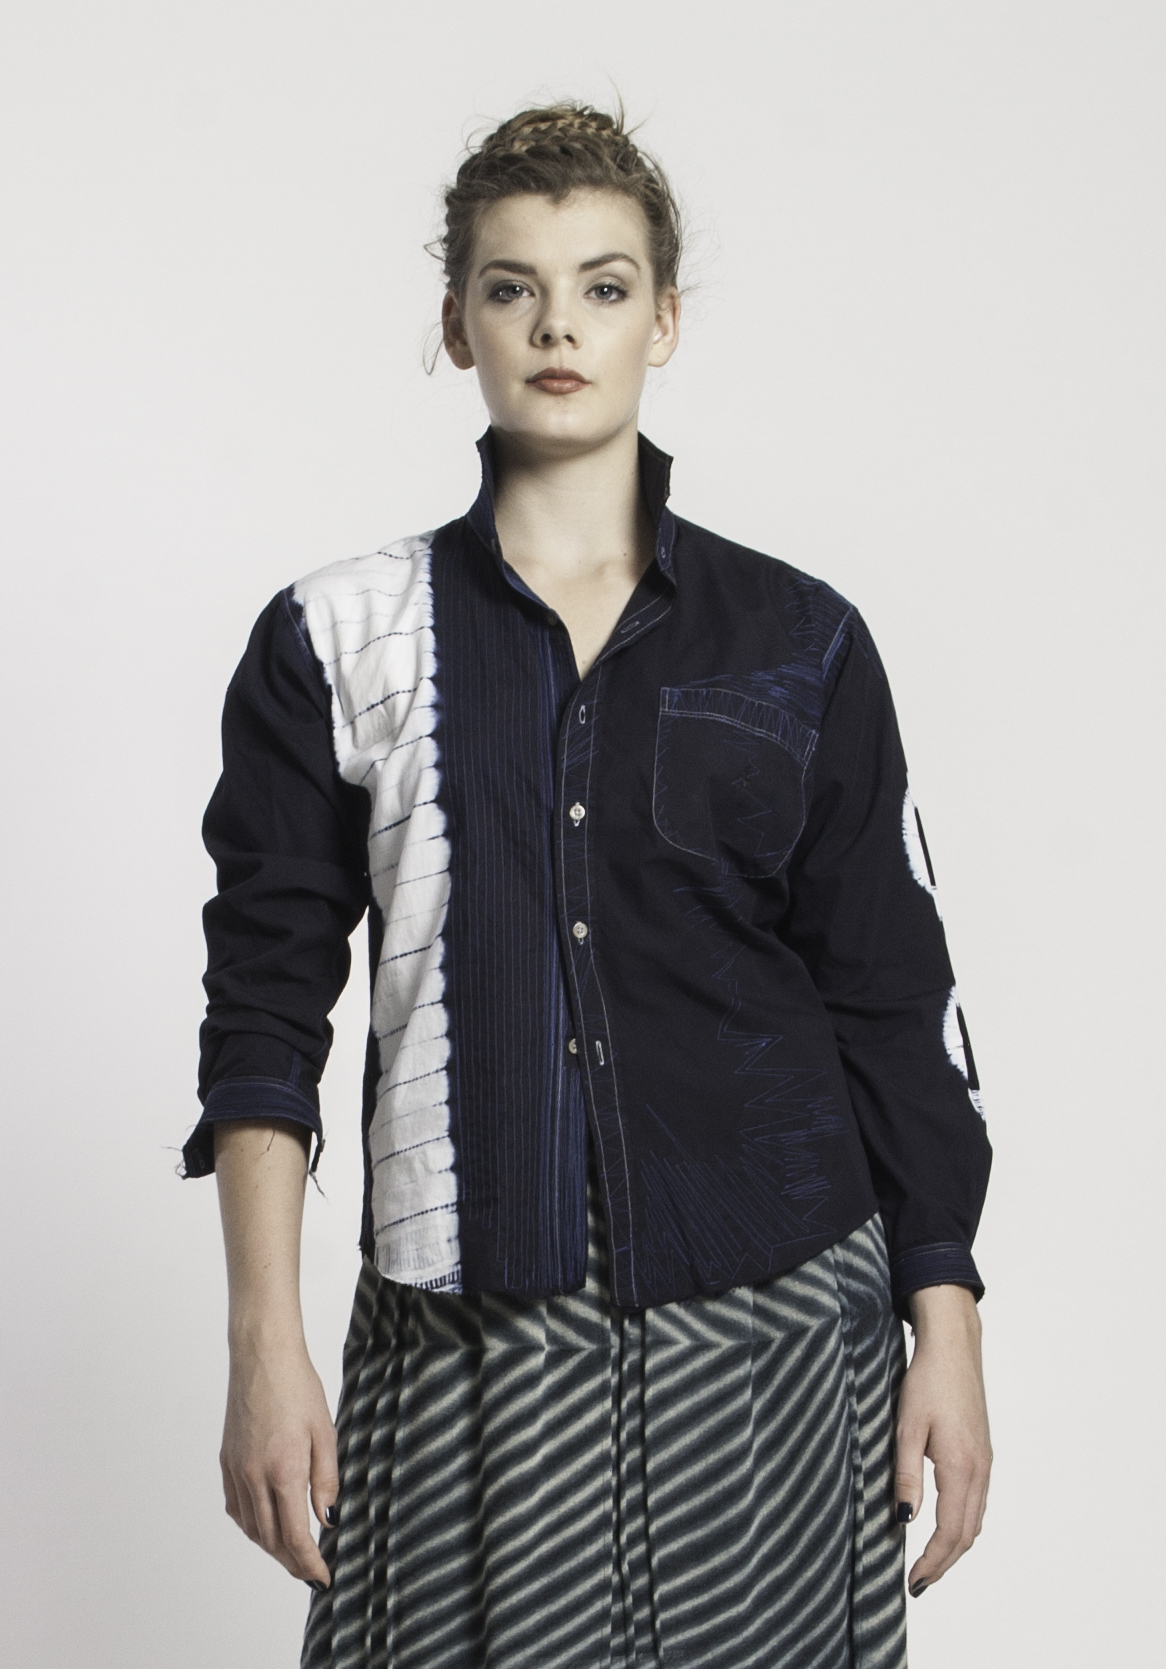  Mary Jaeger, Shirt/jacket. Fashioned from a repurposed man’s tailored shirt. ©2019 maryjaeger.com. Photo courtesy of the artist. 